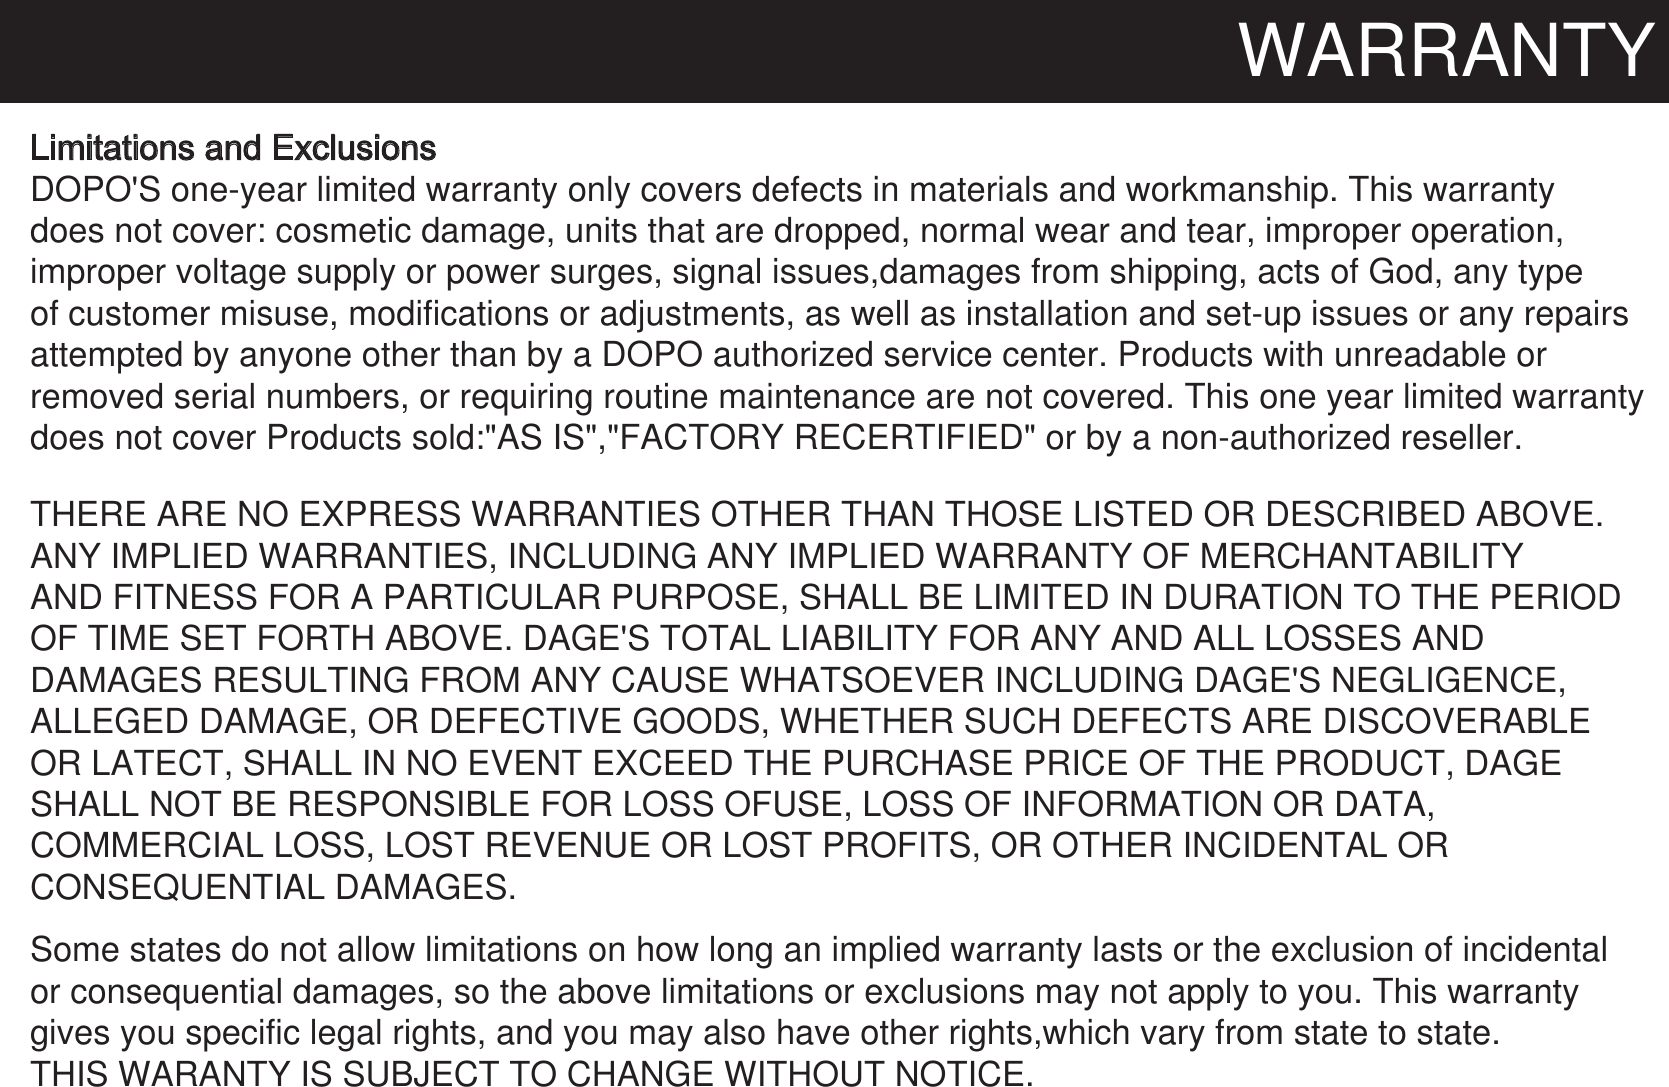 WARRANTYLimitations and ExclusionsDOPO&apos;S one-year limited warranty only covers defects in materials and workmanship. This warrantydoes not cover: cosmetic damage, units that are dropped, normal wear and tear, improper operation,improper voltage supply or power surges, signal issues,damages from shipping, acts of God, any typeof customer misuse, modifications or adjustments, as well as installation and set-up issues or any repairsattempted by anyone other than by a DOPO authorized service center. Products with unreadable or  removed serial numbers, or requiring routine maintenance are not covered. This one year limited warranty  does not cover Products sold:&quot;AS IS&quot;,&quot;FACTORY RECERTIFIED&quot; or by a non-authorized reseller. THERE ARE NO EXPRESS WARRANTIES OTHER THAN THOSE LISTED OR DESCRIBED ABOVE. ANY IMPLIED WARRANTIES, INCLUDING ANY IMPLIED WARRANTY OF MERCHANTABILITYAND FITNESS FOR A PARTICULAR PURPOSE, SHALL BE LIMITED IN DURATION TO THE PERIODOF TIME SET FORTH ABOVE. DAGE&apos;S TOTAL LIABILITY FOR ANY AND ALL LOSSES AND DAMAGES RESULTING FROM ANY CAUSE WHATSOEVER INCLUDING DAGE&apos;S NEGLIGENCE,ALLEGED DAMAGE, OR DEFECTIVE GOODS, WHETHER SUCH DEFECTS ARE DISCOVERABLEOR LATECT, SHALL IN NO EVENT EXCEED THE PURCHASE PRICE OF THE PRODUCT, DAGESHALL NOT BE RESPONSIBLE FOR LOSS OFUSE, LOSS OF INFORMATION OR DATA,COMMERCIAL LOSS, LOST REVENUE OR LOST PROFITS, OR OTHER INCIDENTAL OR CONSEQUENTIAL DAMAGES.Some states do not allow limitations on how long an implied warranty lasts or the exclusion of incidental or consequential damages, so the above limitations or exclusions may not apply to you. This warranty gives you specific legal rights, and you may also have other rights,which vary from state to state. THIS WARANTY IS SUBJECT TO CHANGE WITHOUT NOTICE.